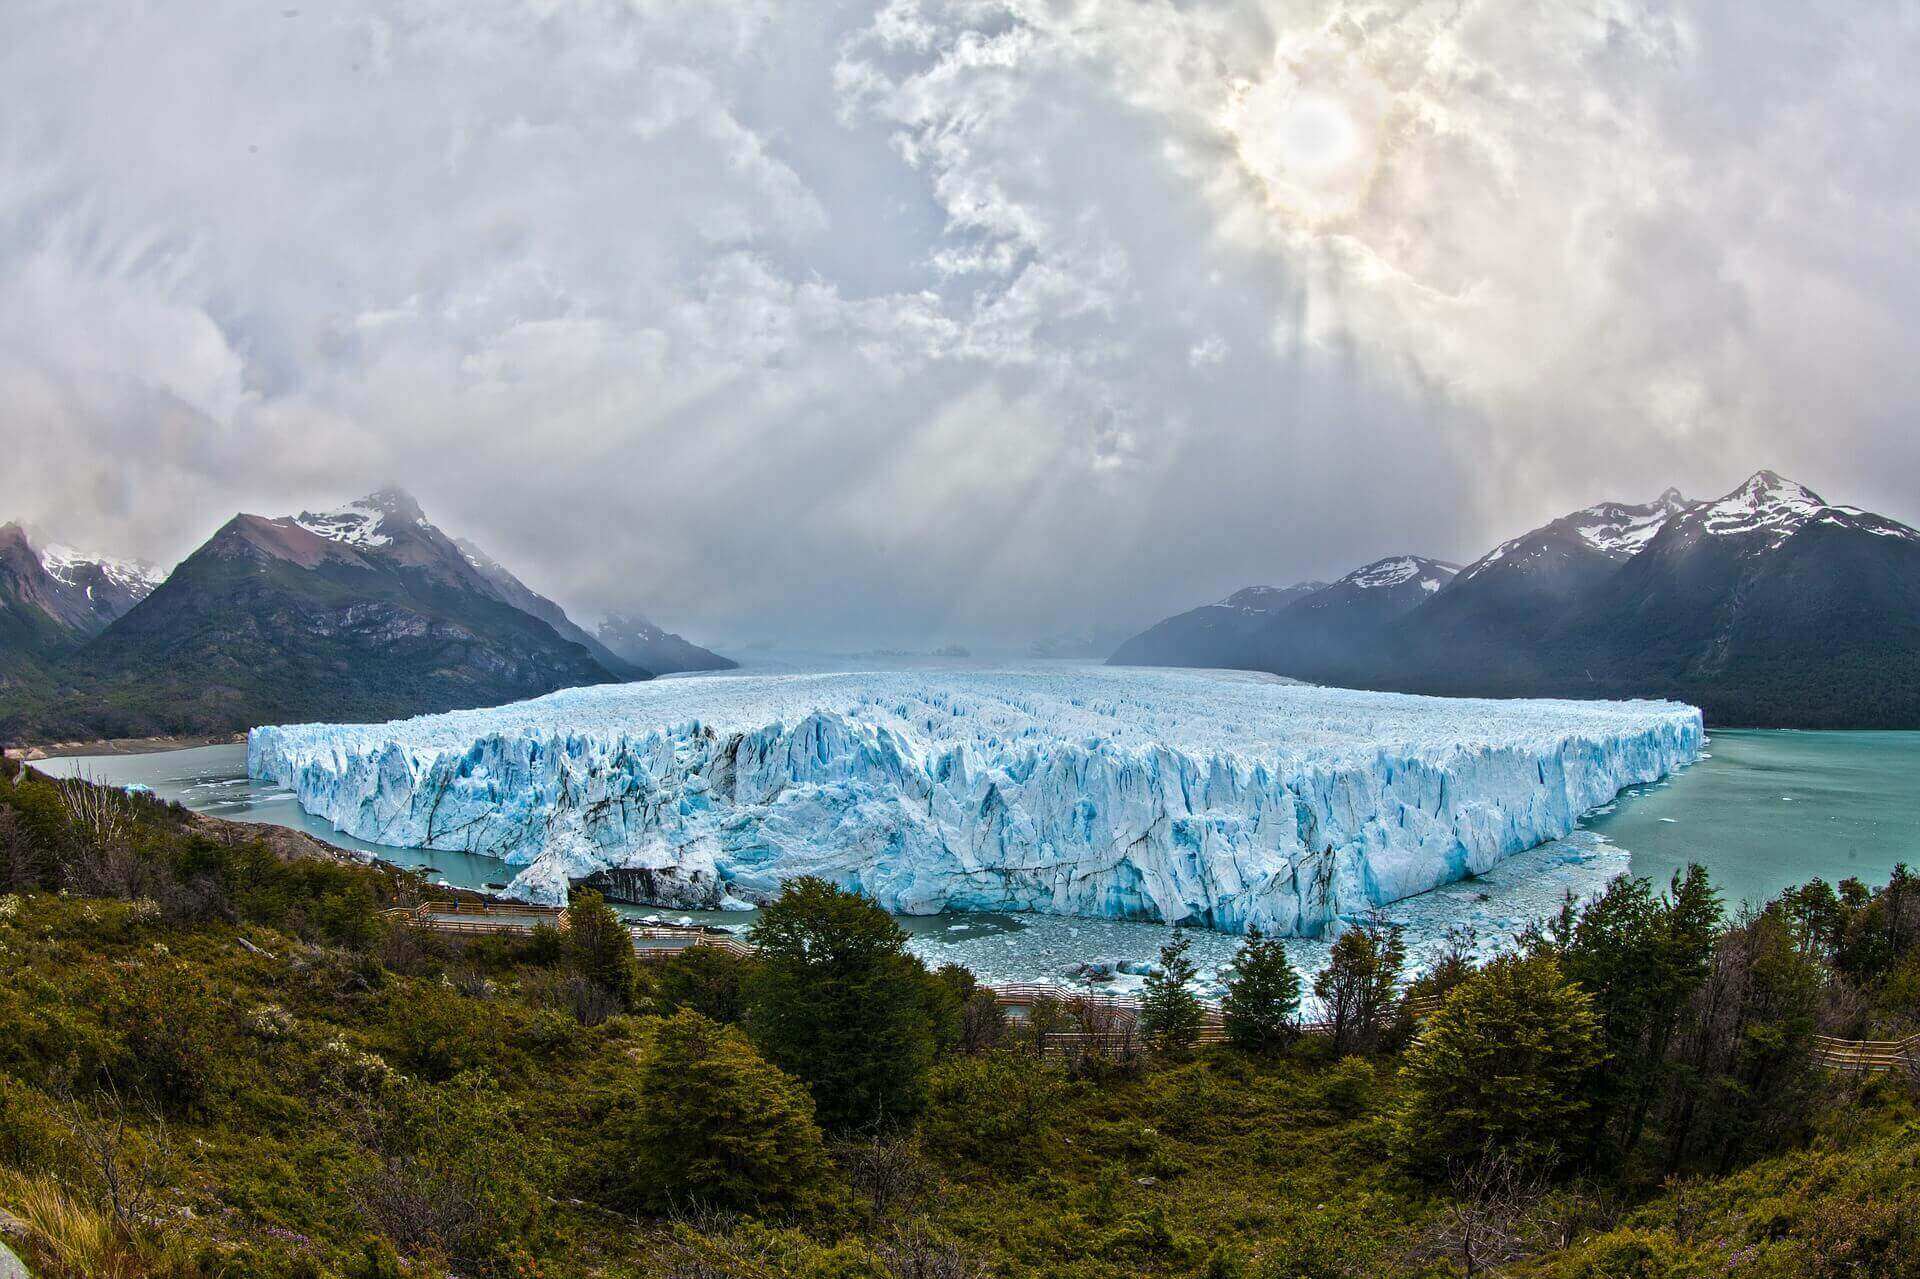 Bespoke holidays to Patagonia in Chile and Argentina with glaciers